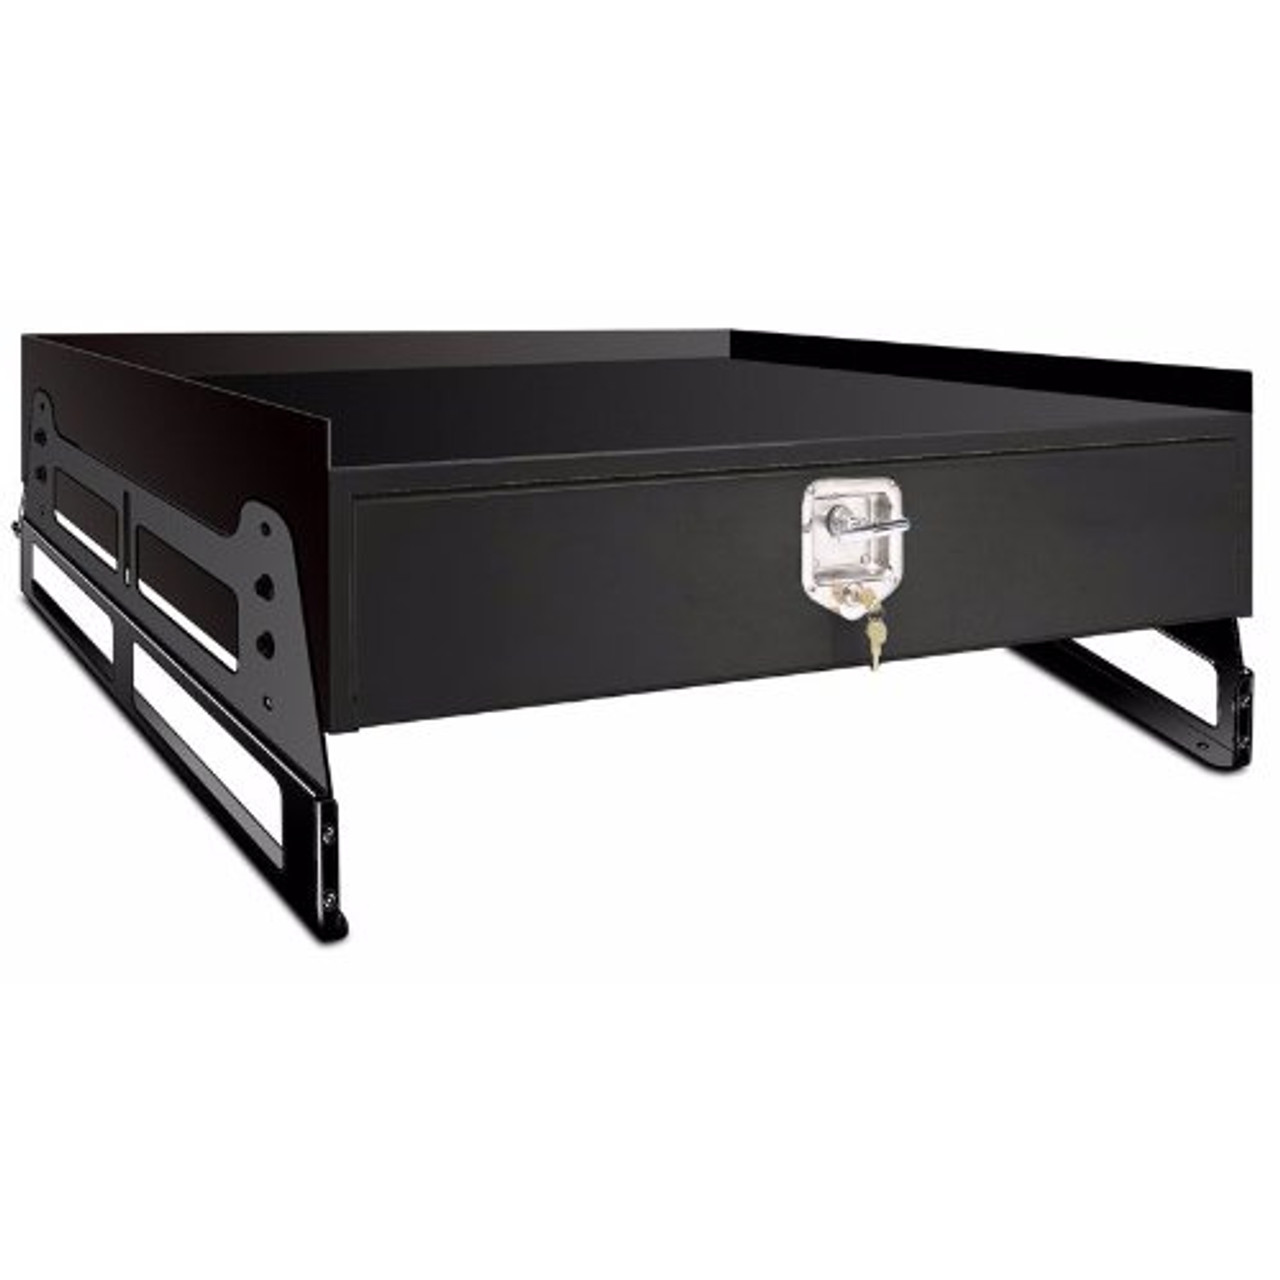 Tufloc 36-010 TufBox Security Drawers SUV Security Drawer: 12X38X32, Secure Weapon Lock Box, Combination or T-Handle Lock, Optional Drawer Base, Foam Insert, Motion Activated Interior LED Light, Black